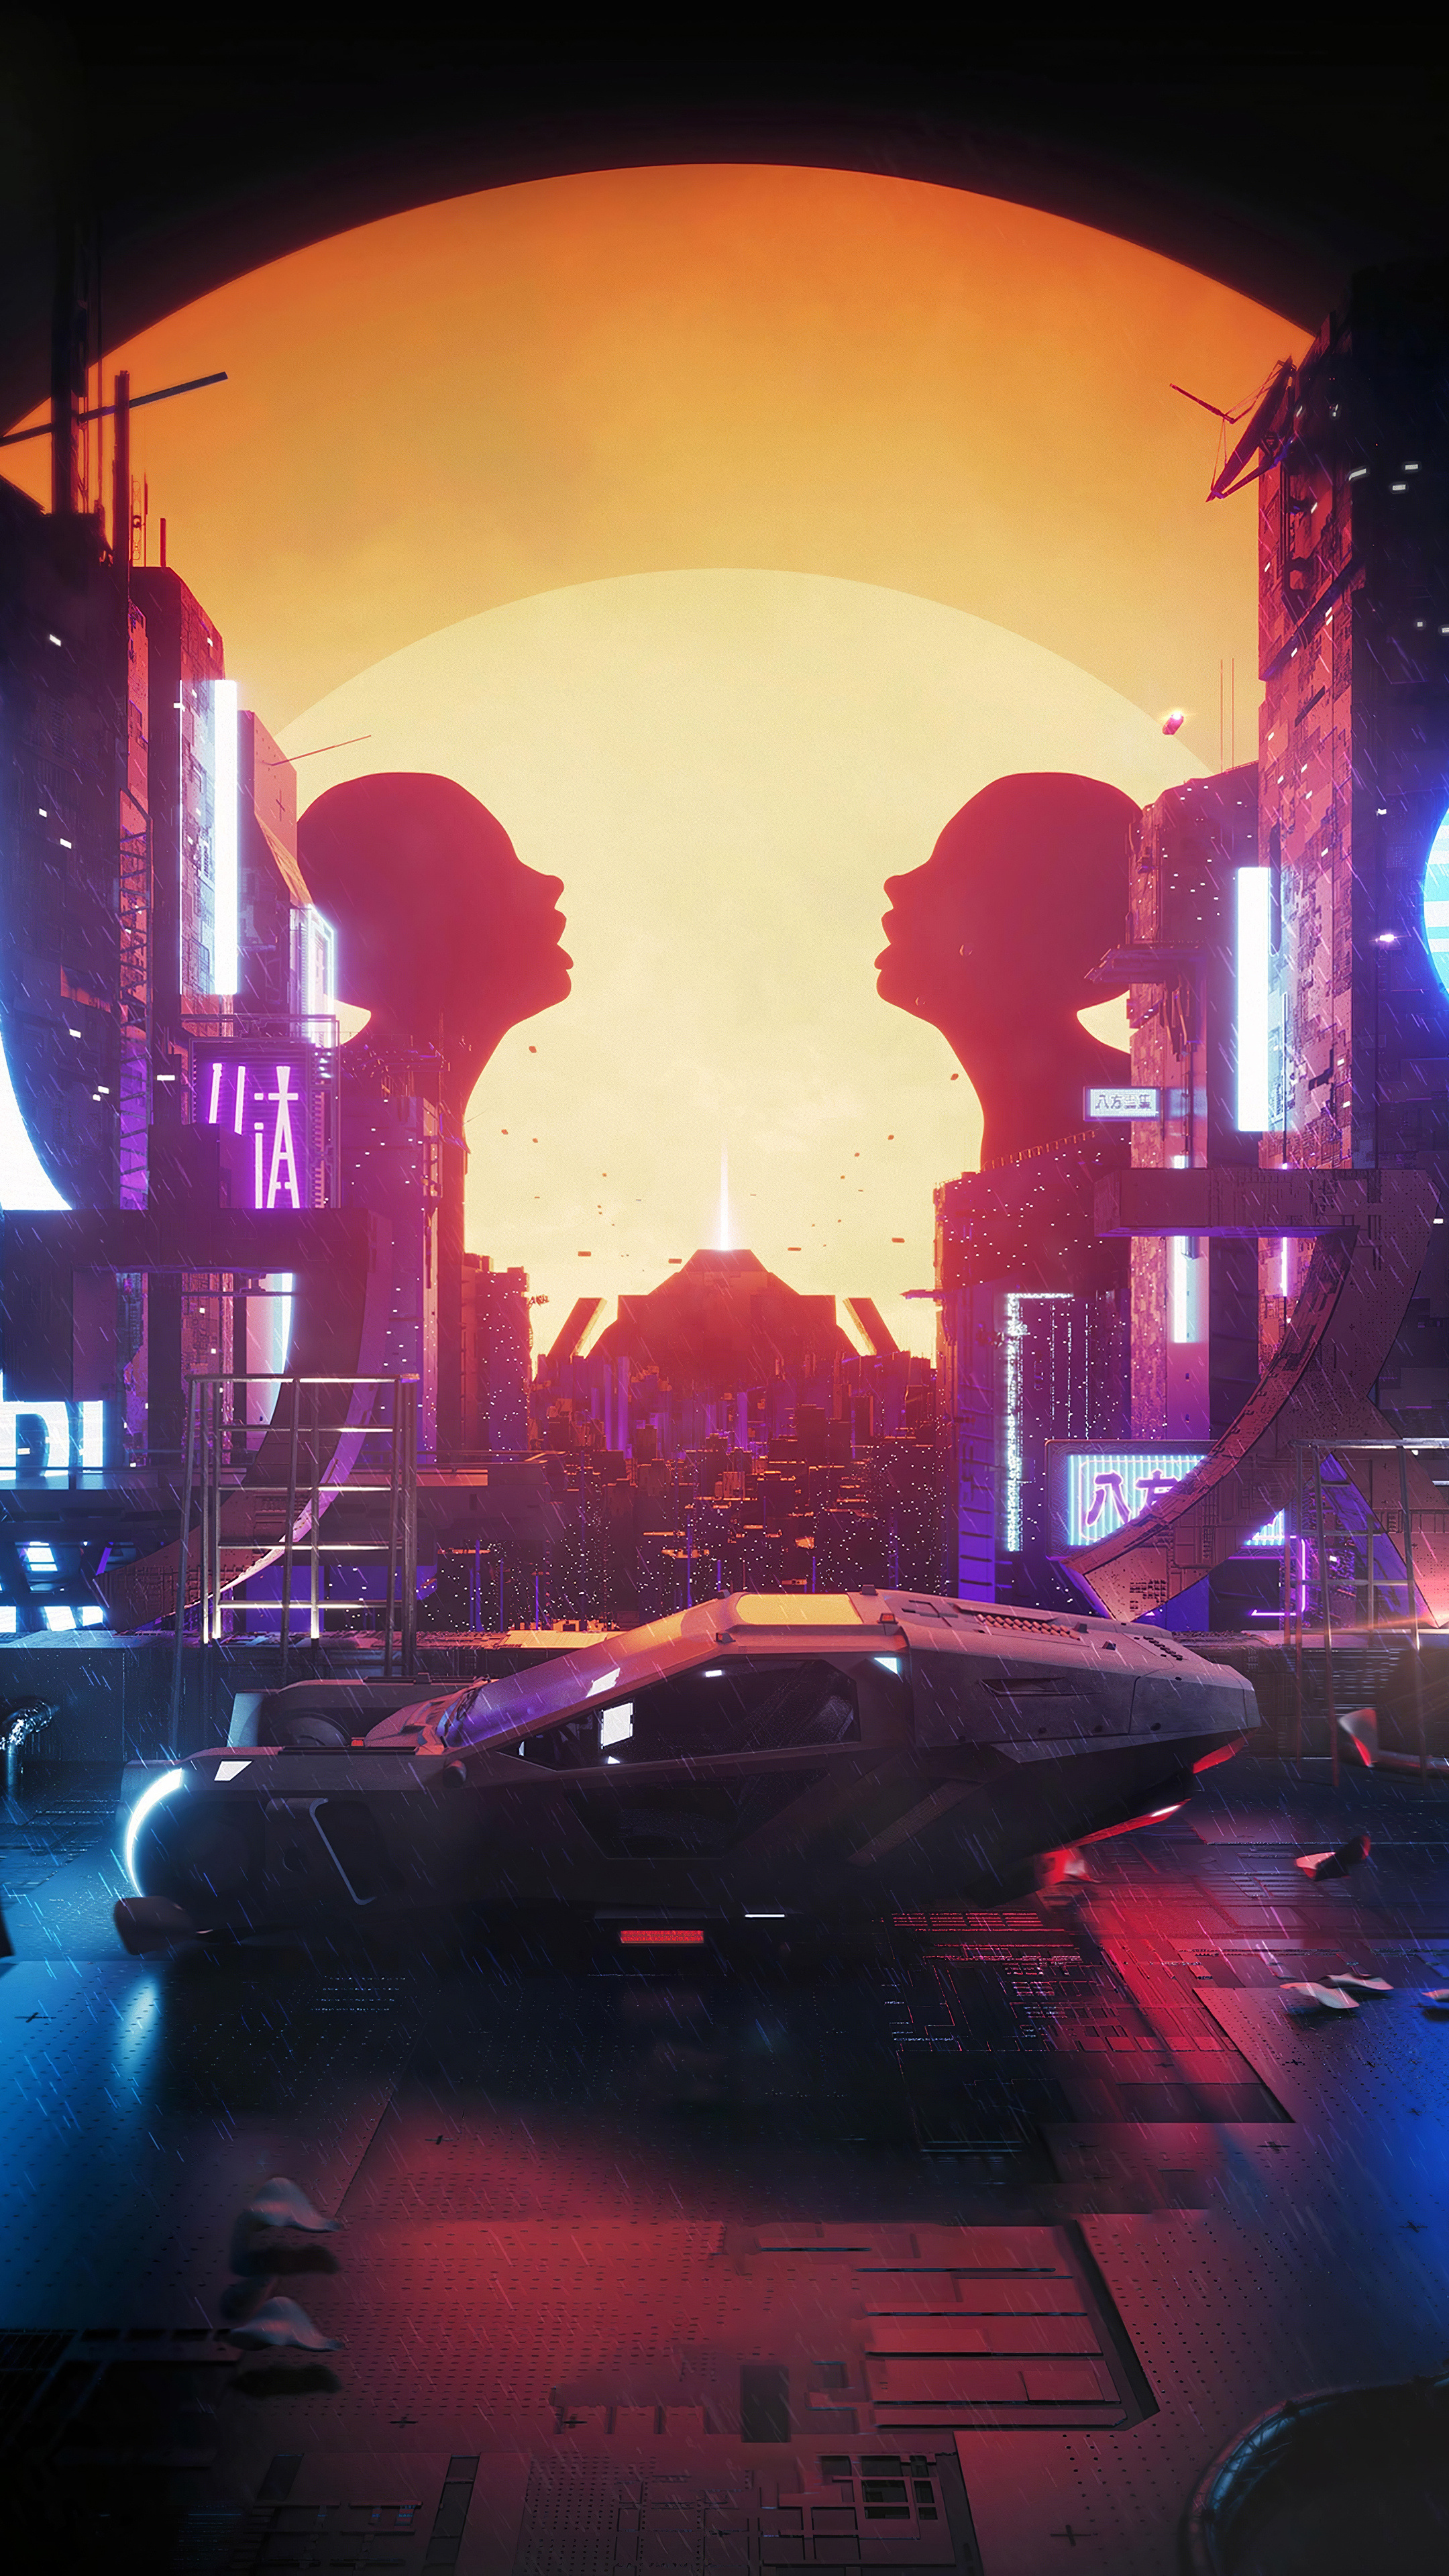 Blade Runner 2049 sci-fi car, 4K Sony Xperia wallpapers, HD images, 2160x3840 4K Phone